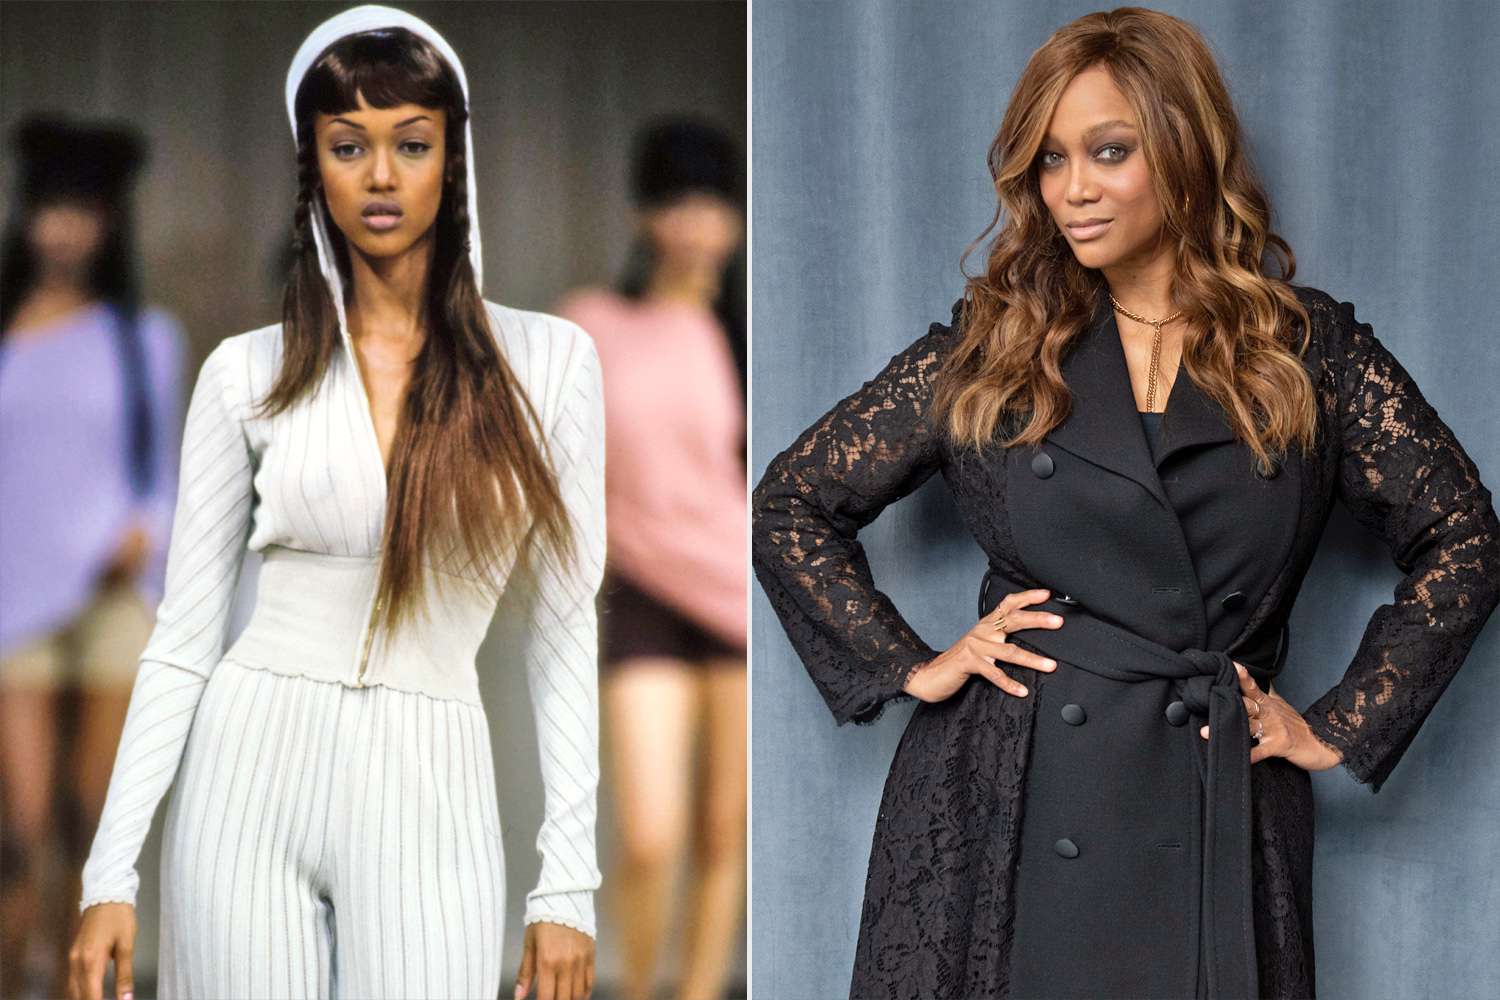 Book cover use of this asset requires approval. Please contact your Account Representative. Mandatory Credit: Photo by Guy Marineau/Condé Nast/Shutterstock (13706565ea) Model Tyra Banks walks the Azzedine Alaia Spring 1992 RTW (ready-to-wear) Runway collection. Azzedine Alaia Spring 1992 RTW, France; NEW YORK, NEW YORK - SEPTEMBER 28: Tyra Banks visits the SiriusXM Studios on September 28, 2022 in New York City. (Photo by Noam Galai/Getty Images)